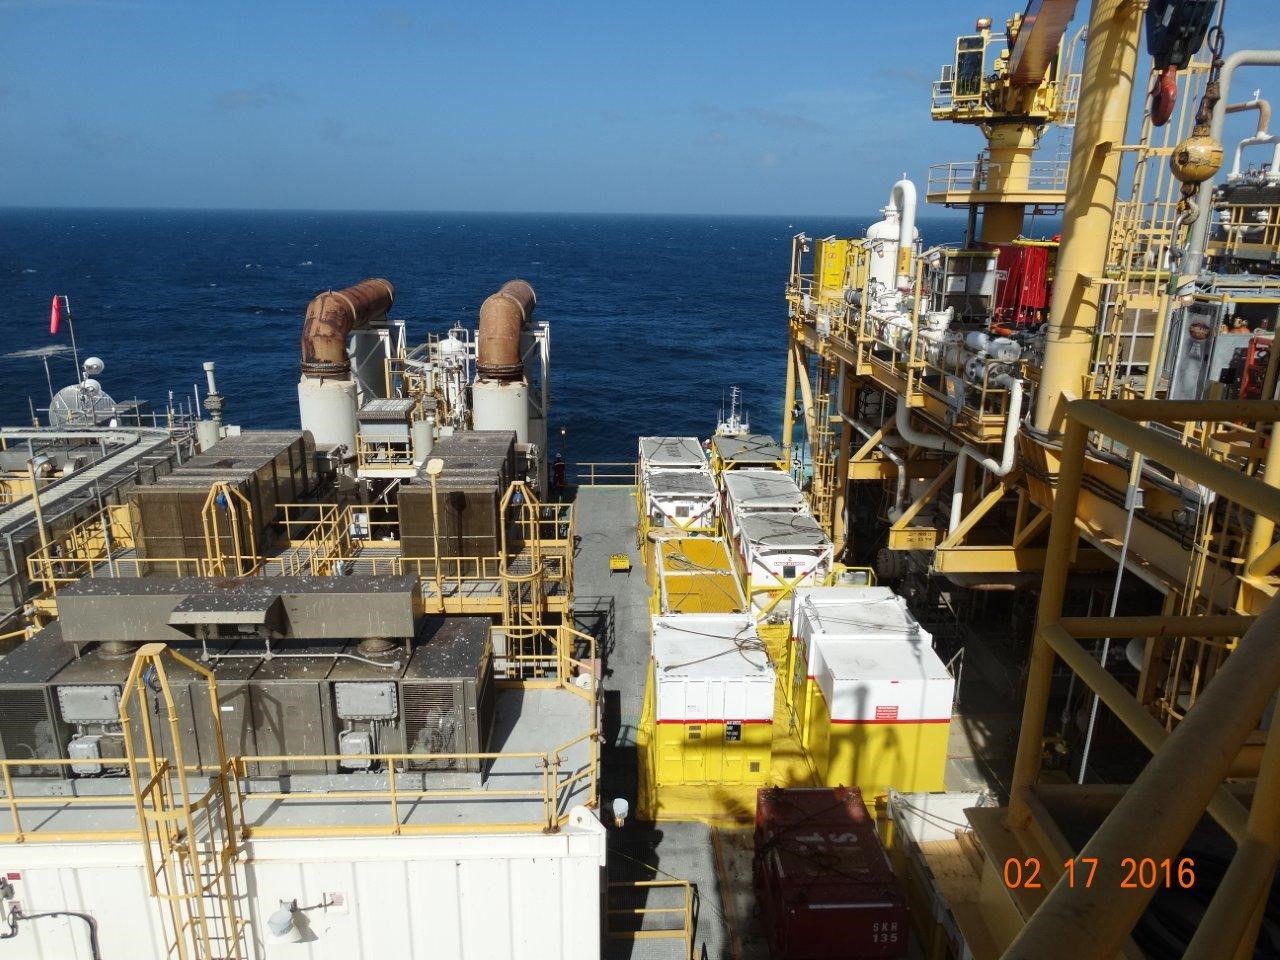 Picture 1: Shows the Tucker equipment layout on the Main Deck of the CPP Platform during the 2016 TAR